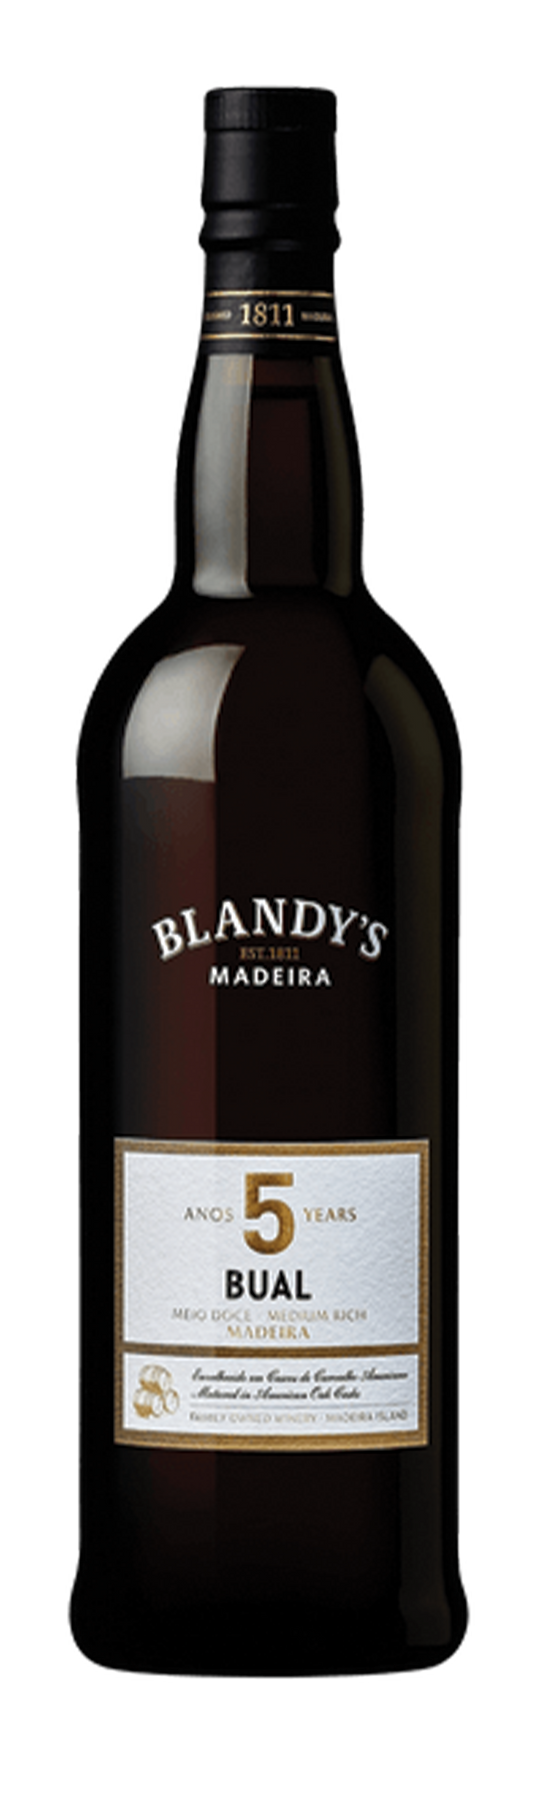 Blandy's Boal 5y 20% 75cl Madeira